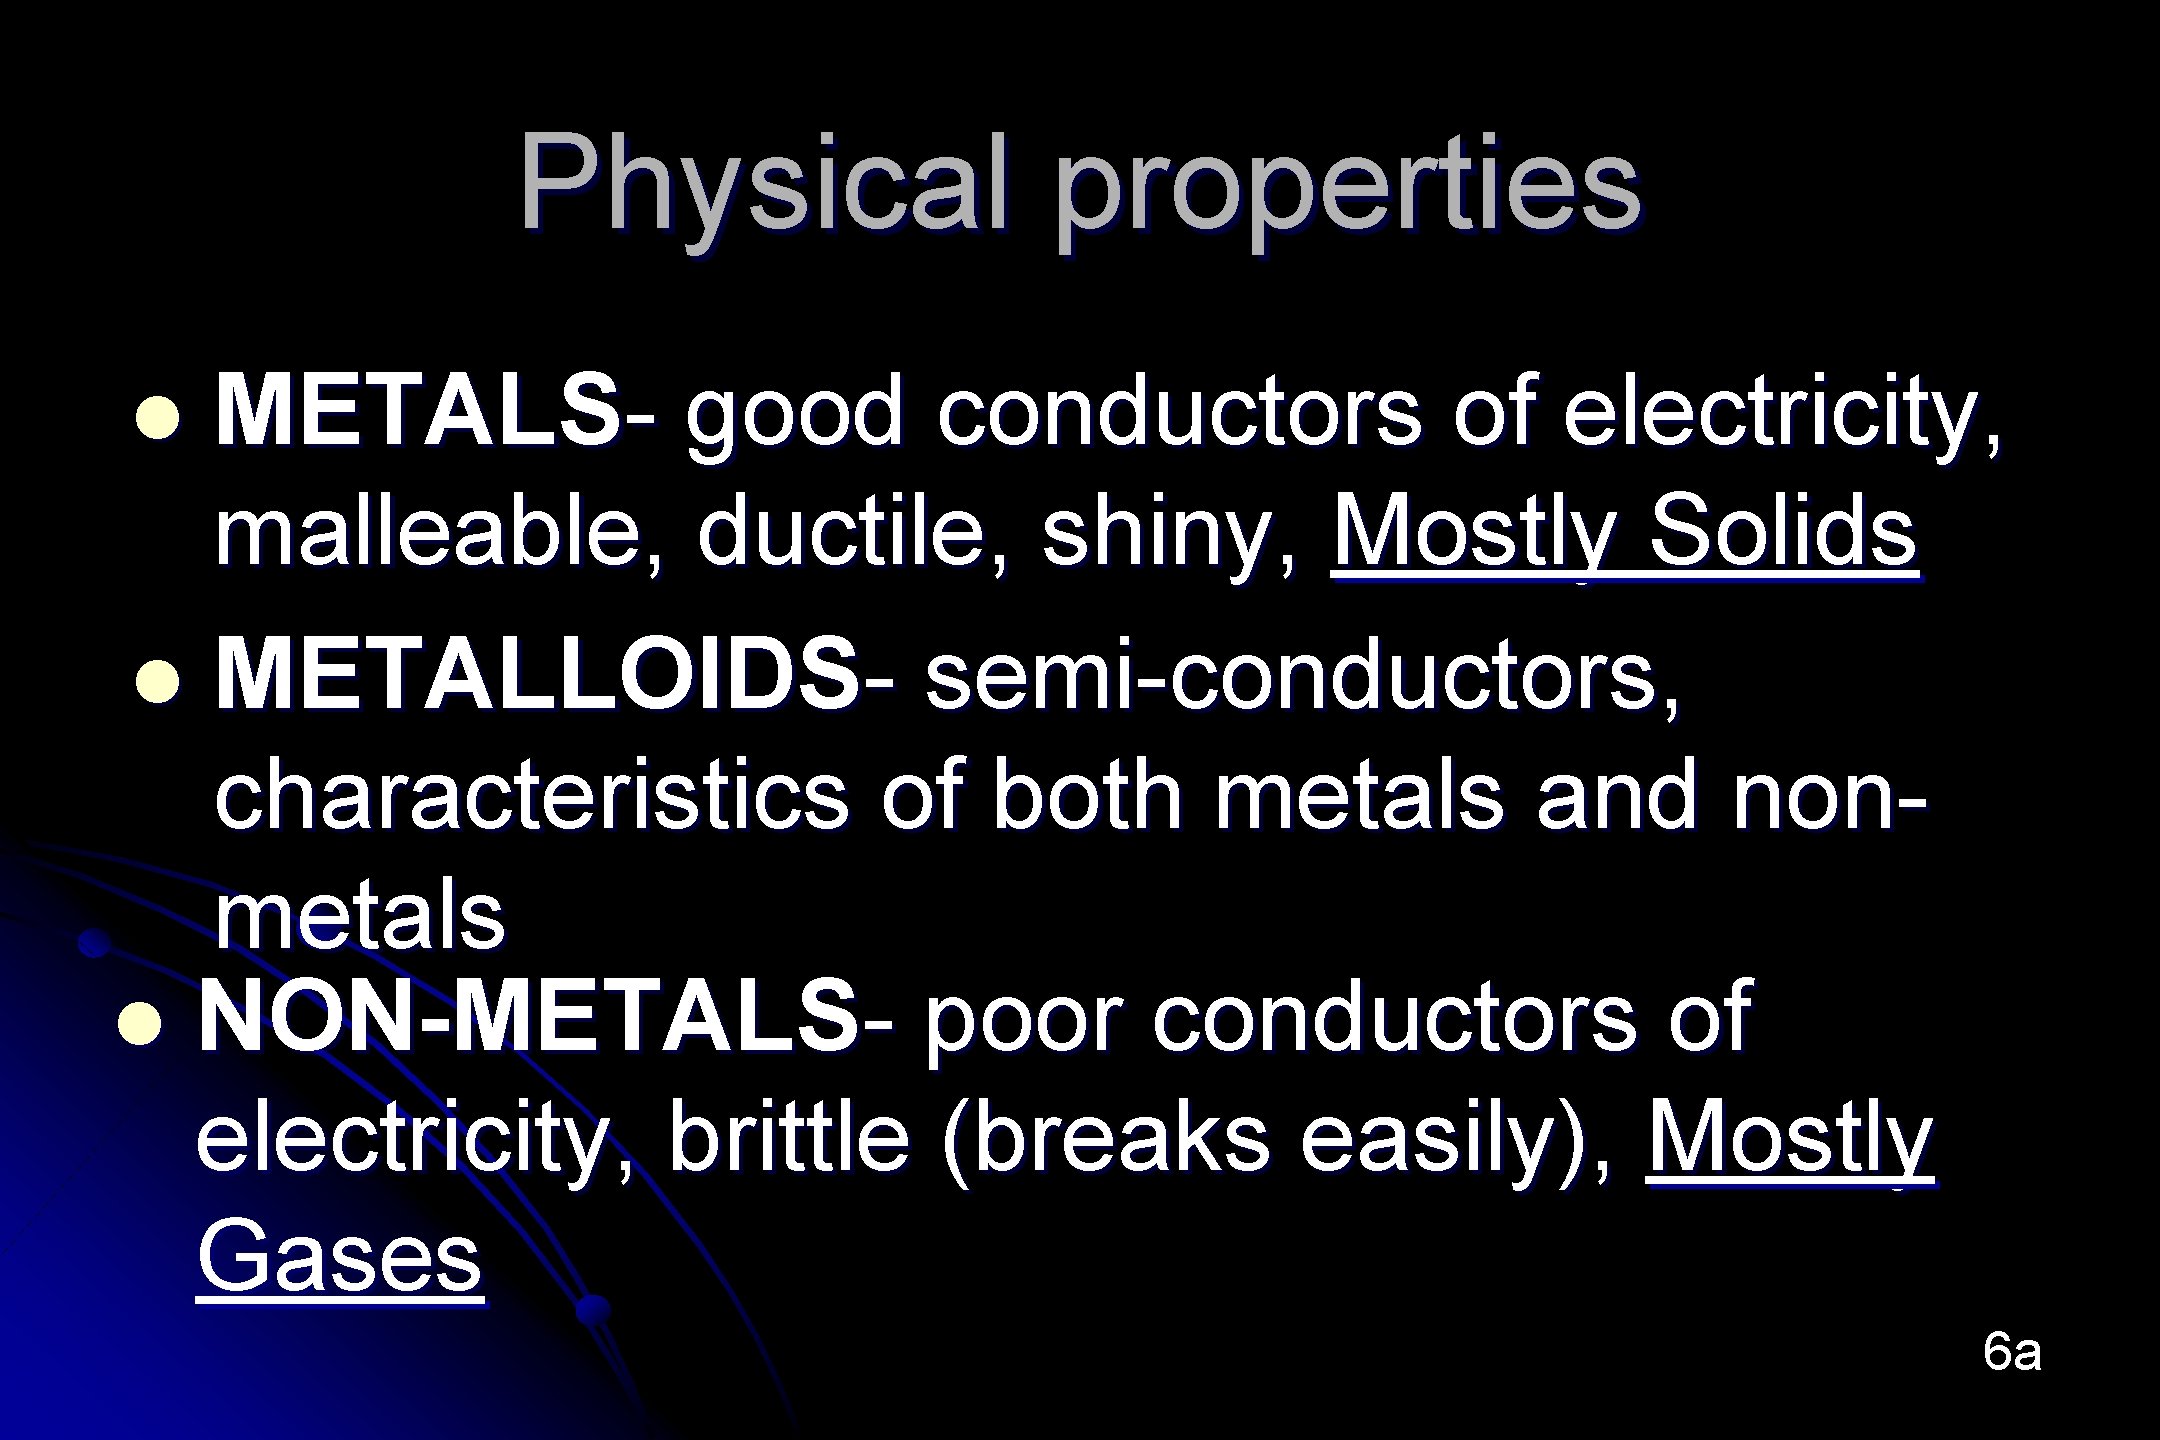 Physical properties METALS- good conductors of electricity, malleable, ductile, shiny, Mostly Solids l METALLOIDS-